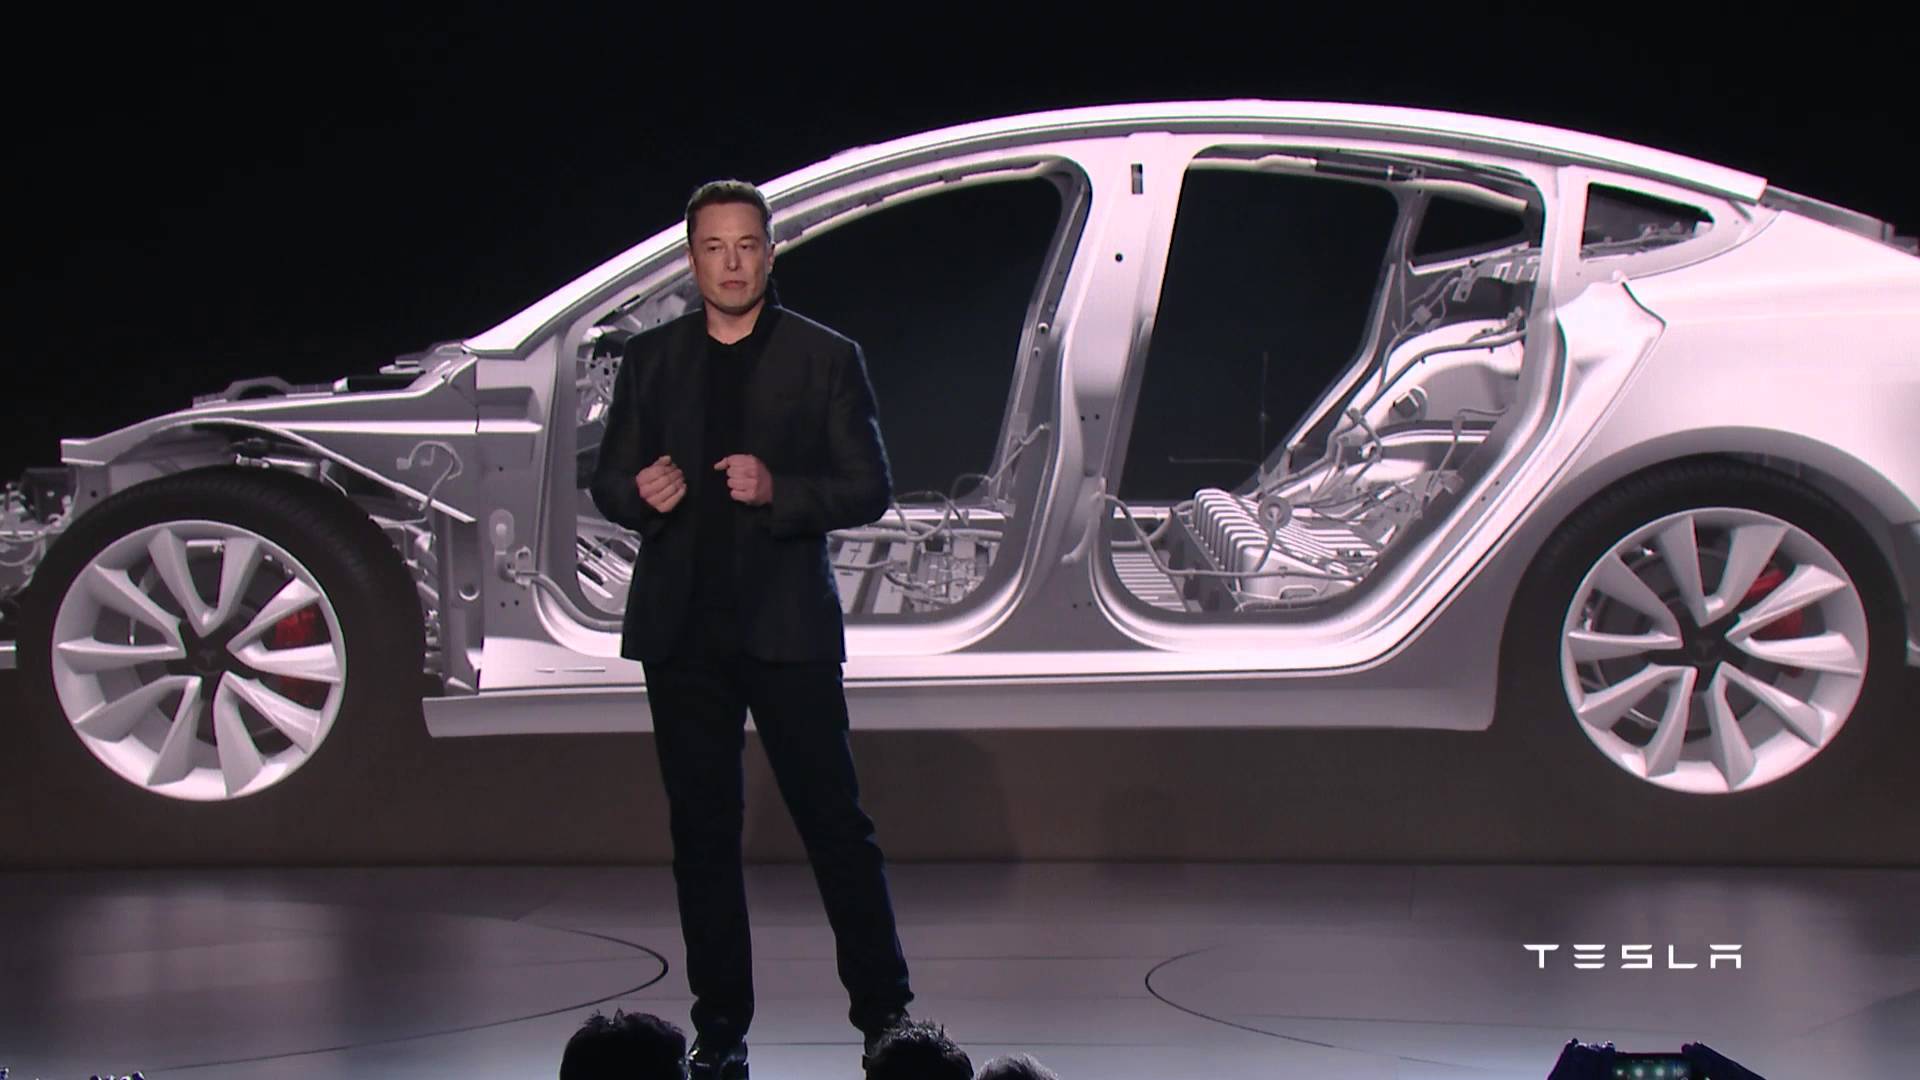 Tesla’s Elon Musk gives Rivian invaluable advice on manufacturing